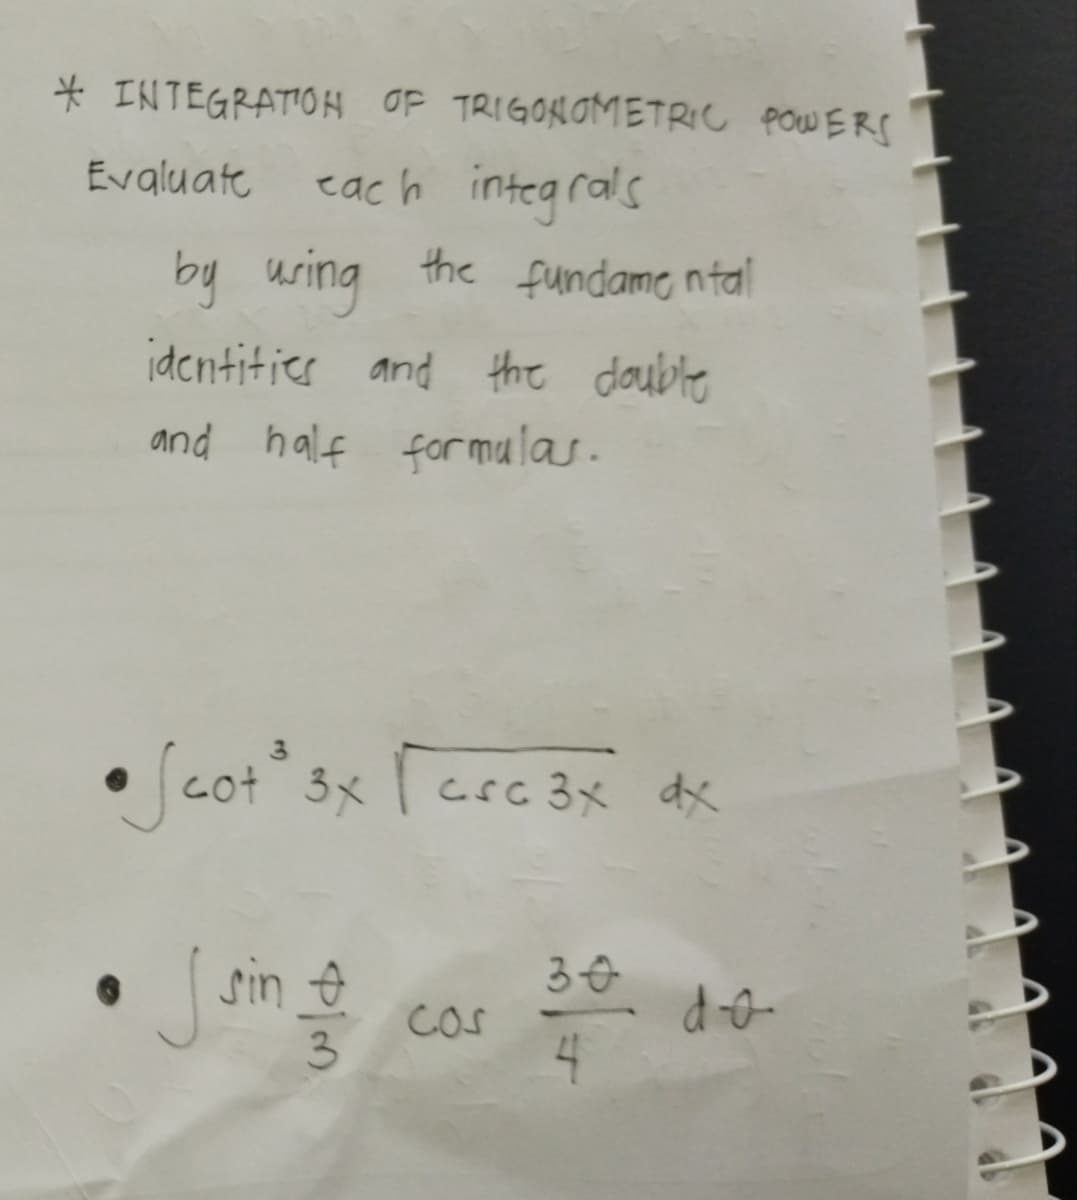 * INTEGRATIOH OF TRIGONOMETRIC POWERS
Evaluate
each integrals
by using the fundame ntal
identities and the dauble
and half formulas.
• Scot
3.
° 3x [ csc 3x dx
CoS
3
4
